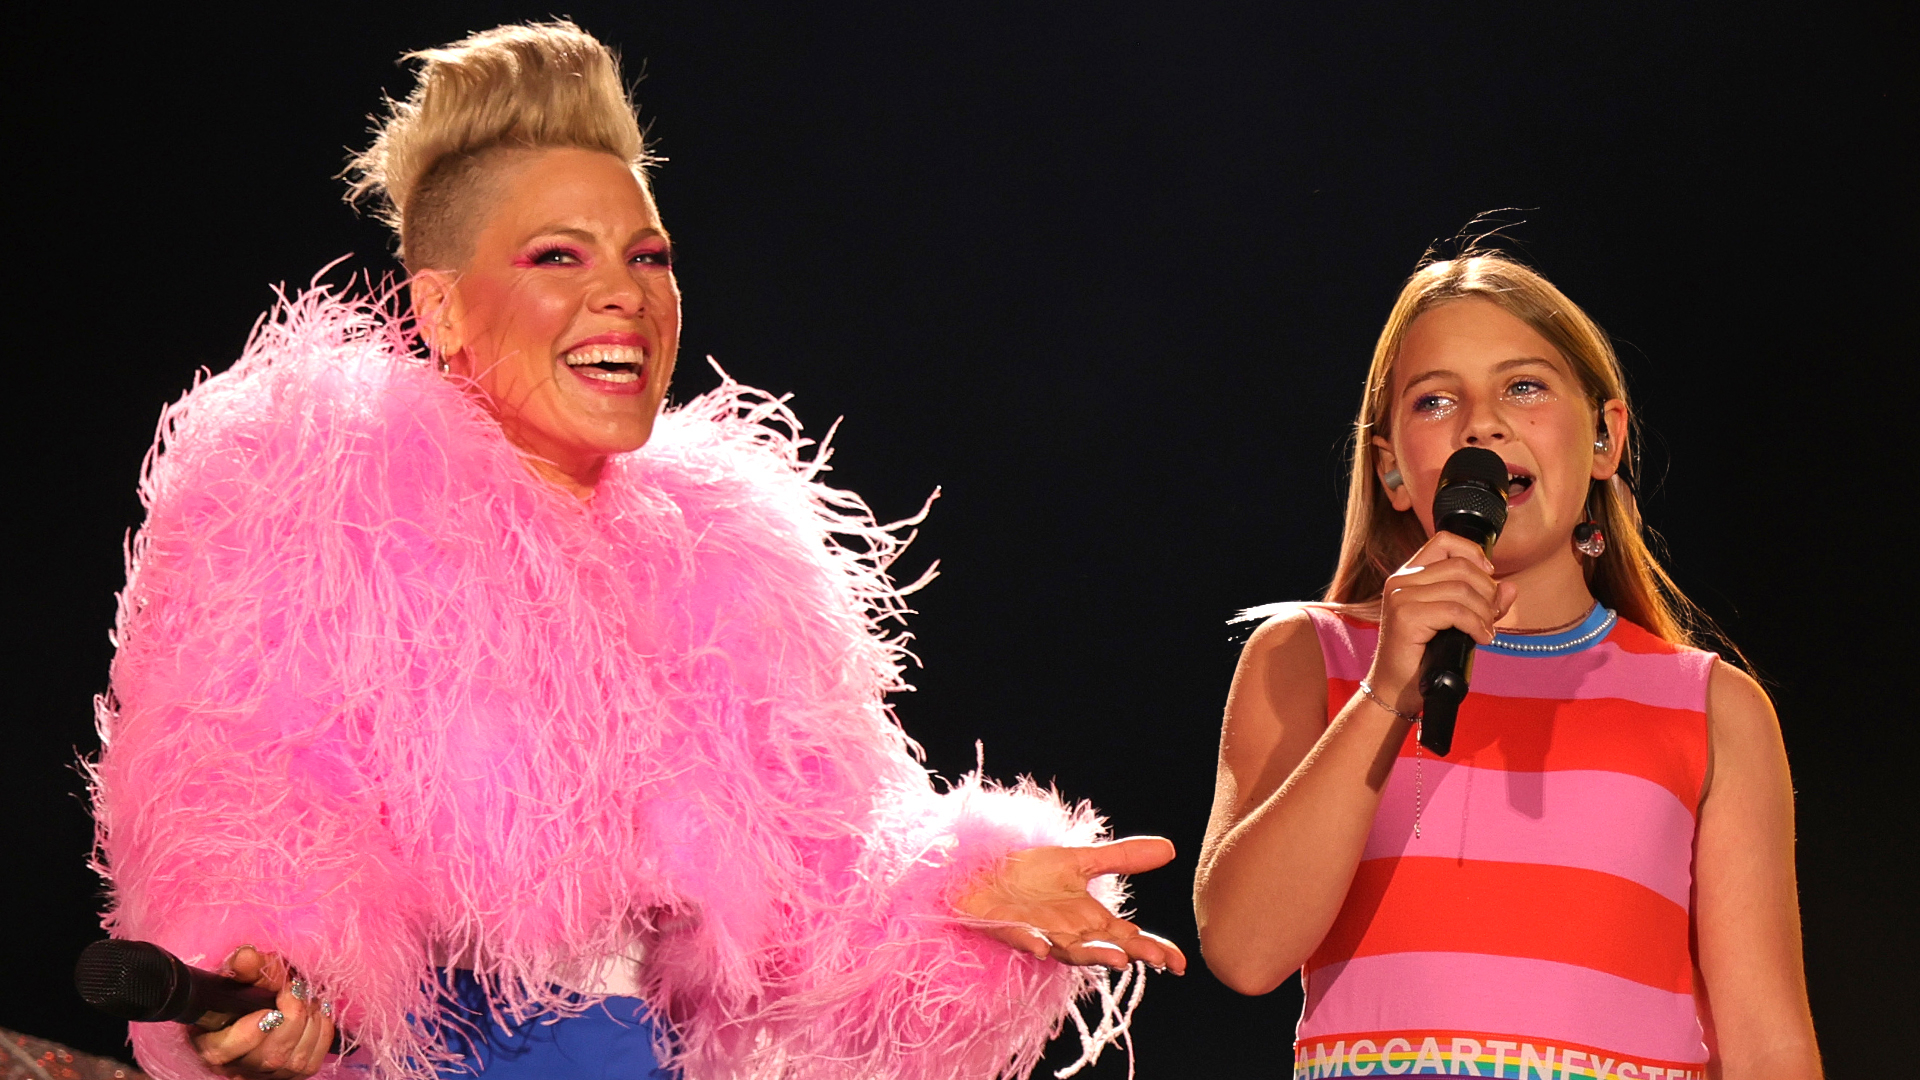 Pink the singer: The story of her career so far and how she became famous